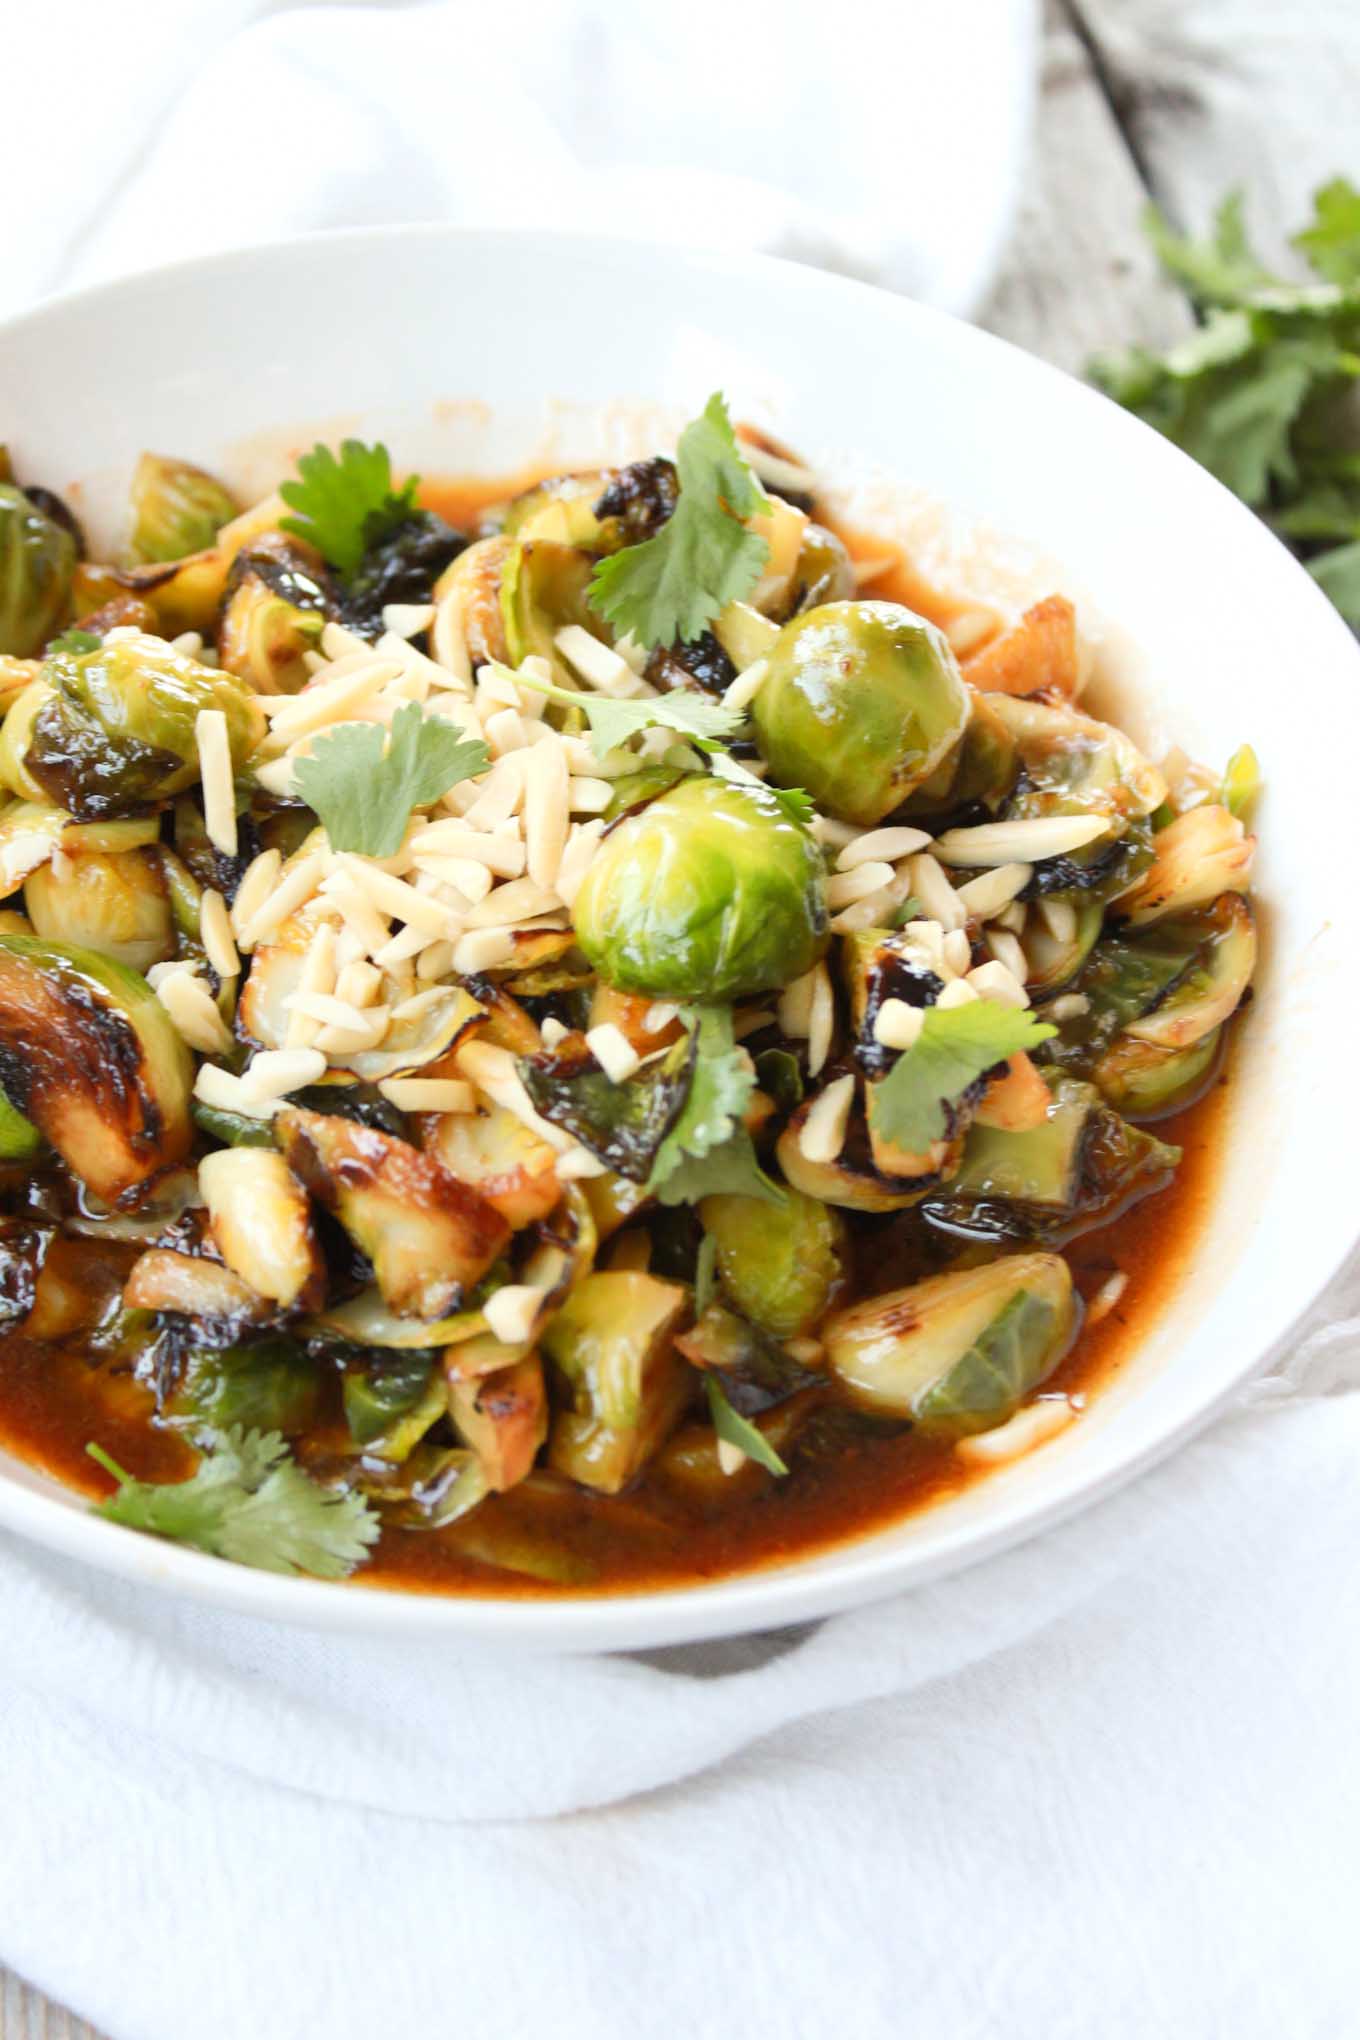 Sriracha Fried Brussels Sprouts | simplerootswellness.com